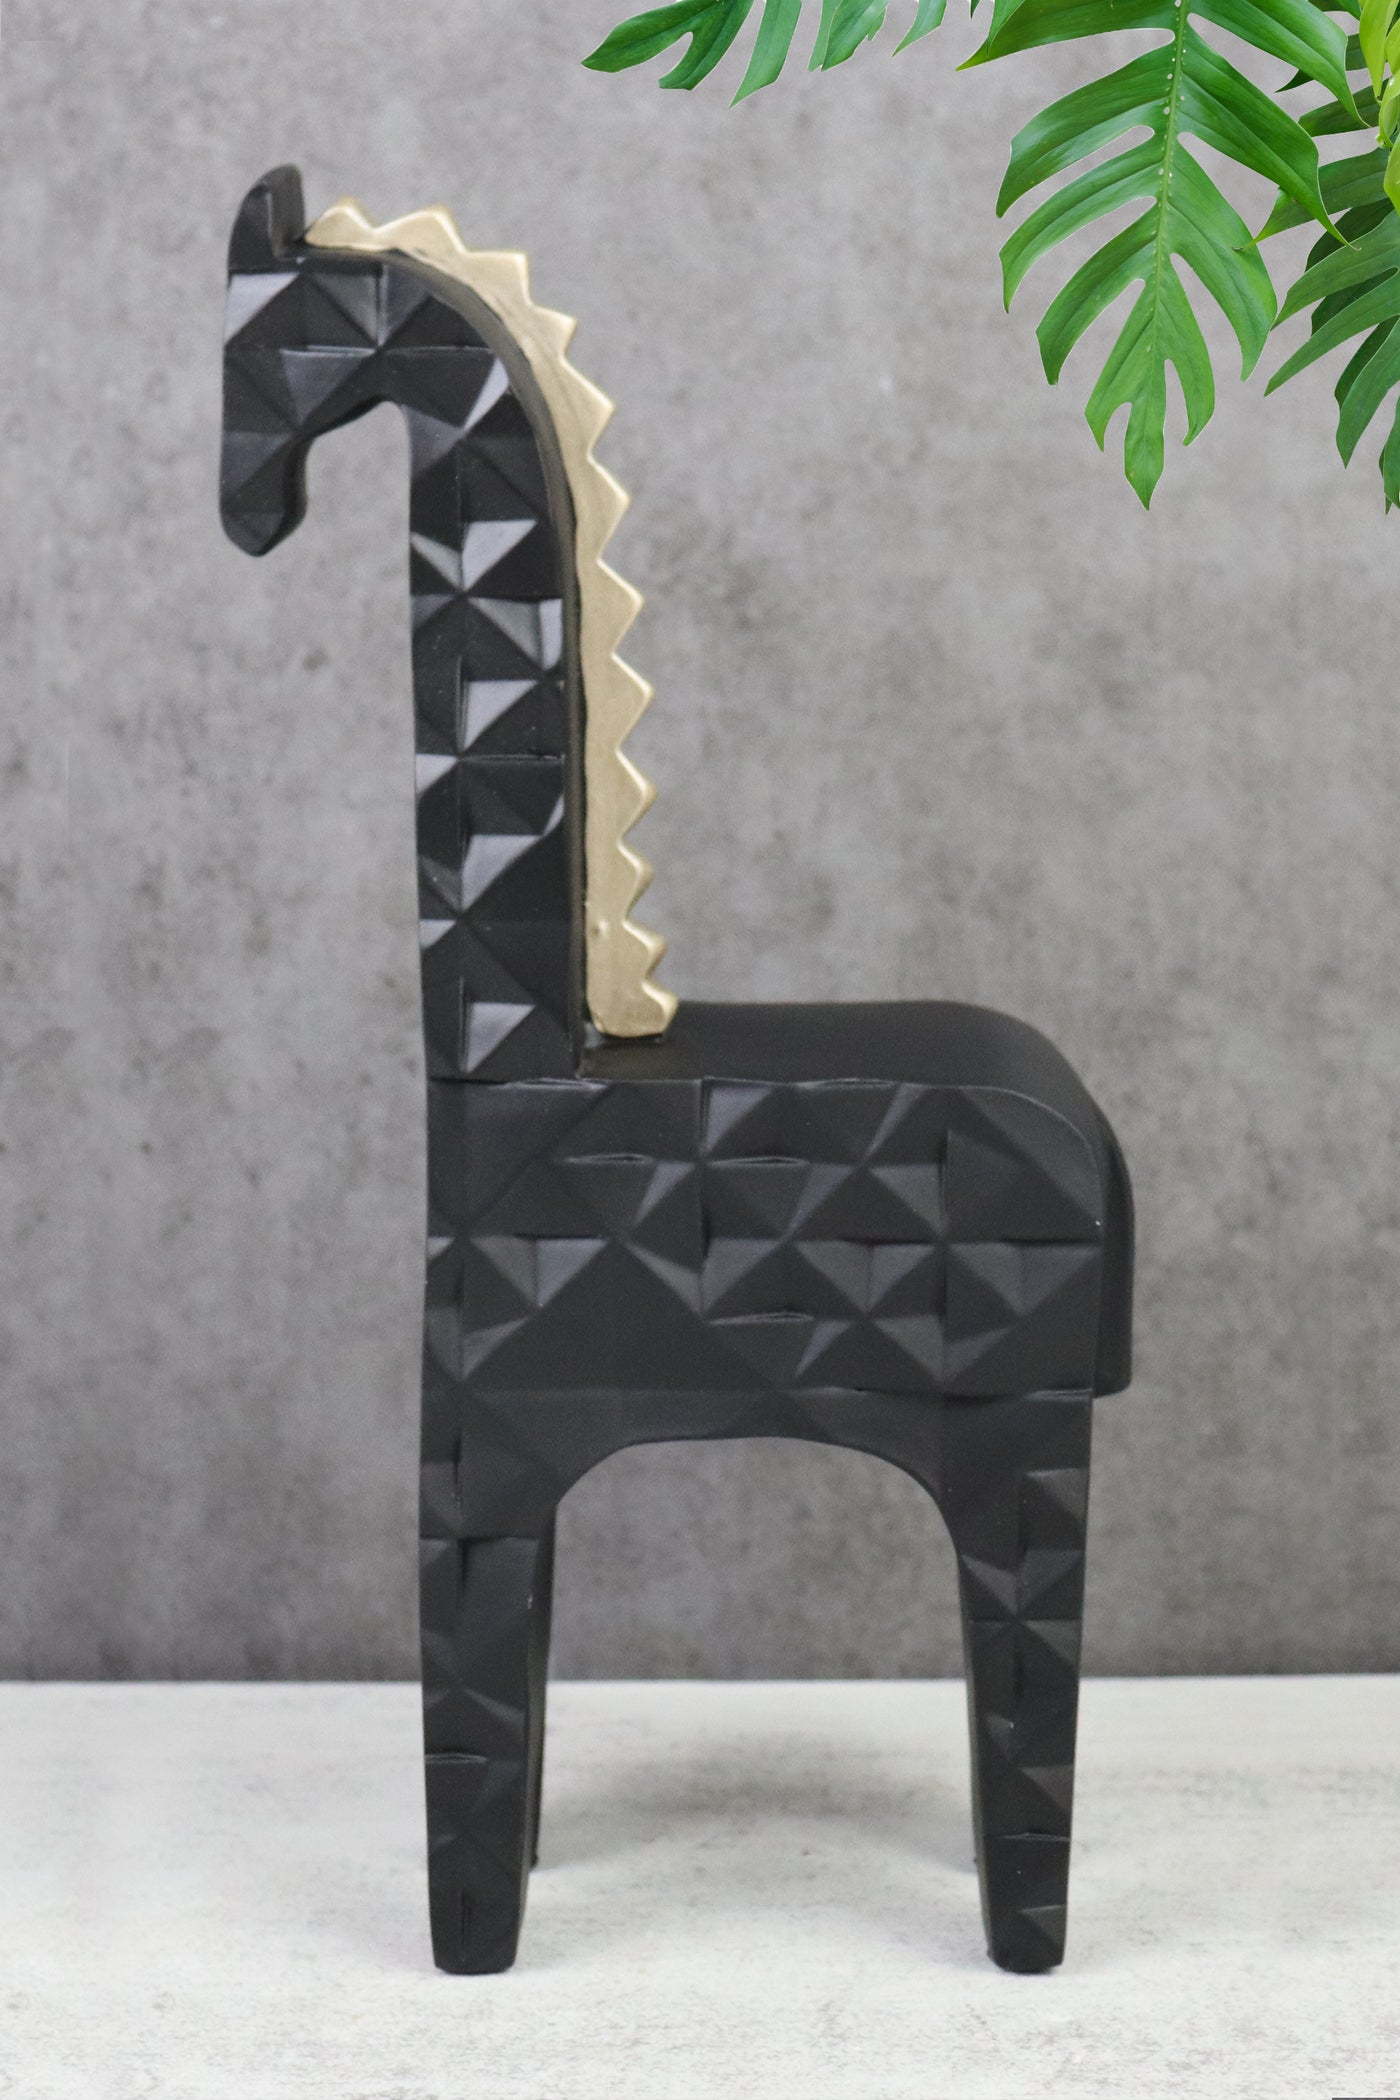 Modern style Resin Giraffe Statue for your home or office decor